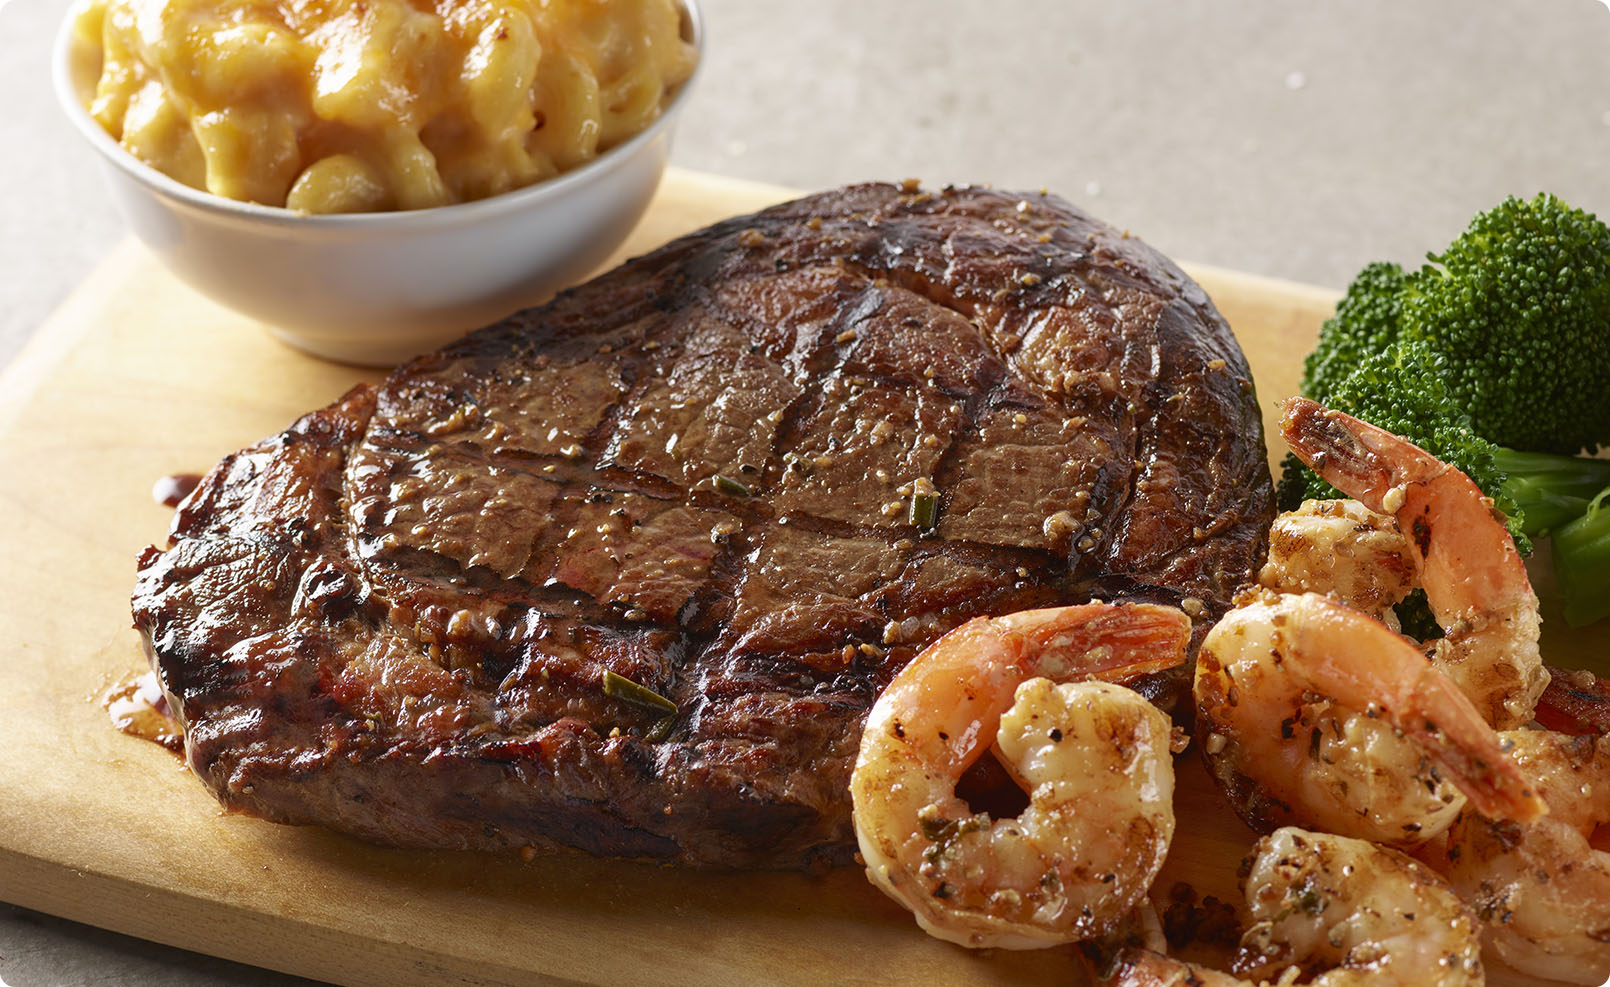 A 14oz. fire-grilled, juicy ribeye with a crispy, dark crust on the edges. Sides of shrimp, broccoli, and mac and cheese.